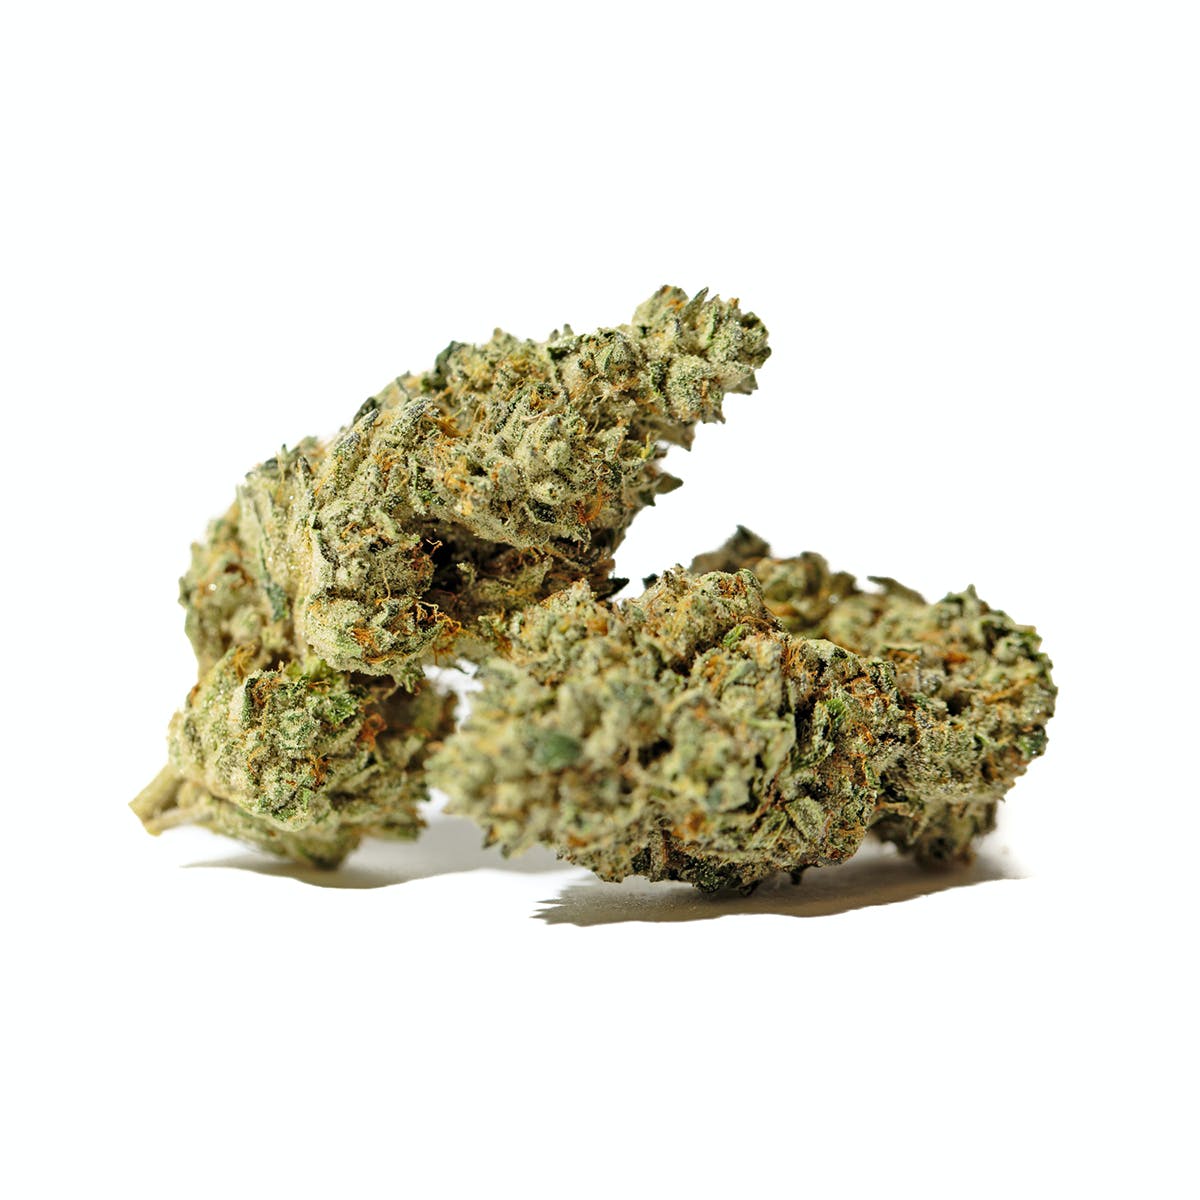 Buy do-si-do weed strain online